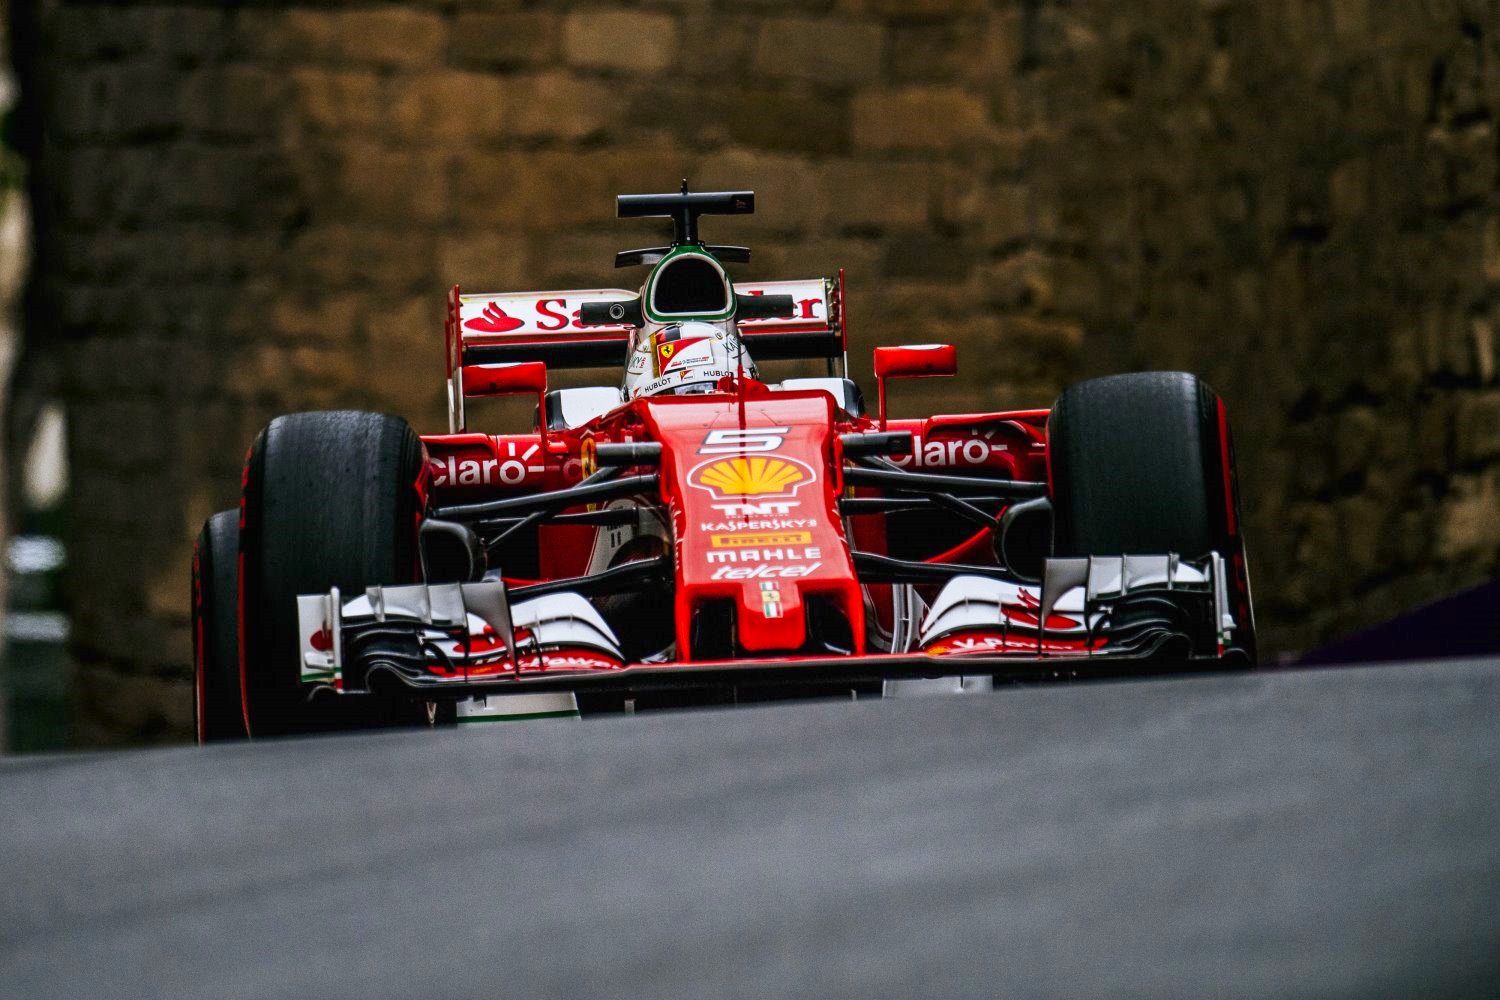 Vettel says Ferrari recovered to finish 2nd but he knows his car is miles behind the Mercedes